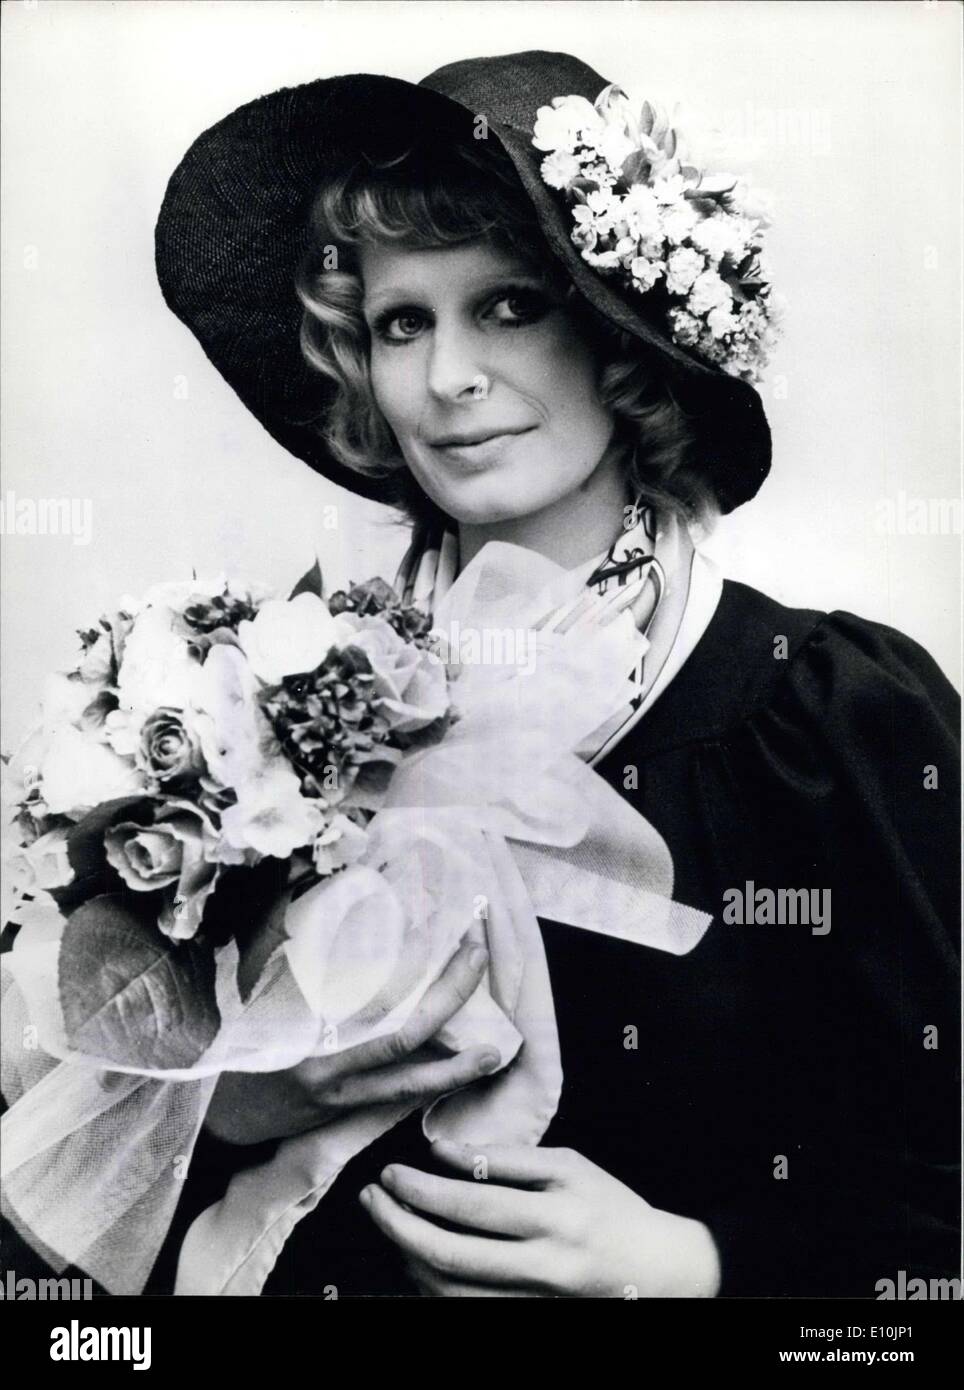 Apr. 10, 1973 - Daughter of Dr. Josef Goebbels Stepson marries Hamburg photographer A beautiful bride was Katarina Quandt when she married in Hamburg the photographer Wolfgang-Peter Geller. The Very pretty and extremely rich woman got to know her husband in an Hamburg newspaper edition where she worked as an assistant. Katarina's father Harald Quandt l(he was the stepson of the 3rd Reich propaganda minister) together with his brother Herbert was owner of the big Quandt Group. Six years ago he died in a plane accident Stock Photo